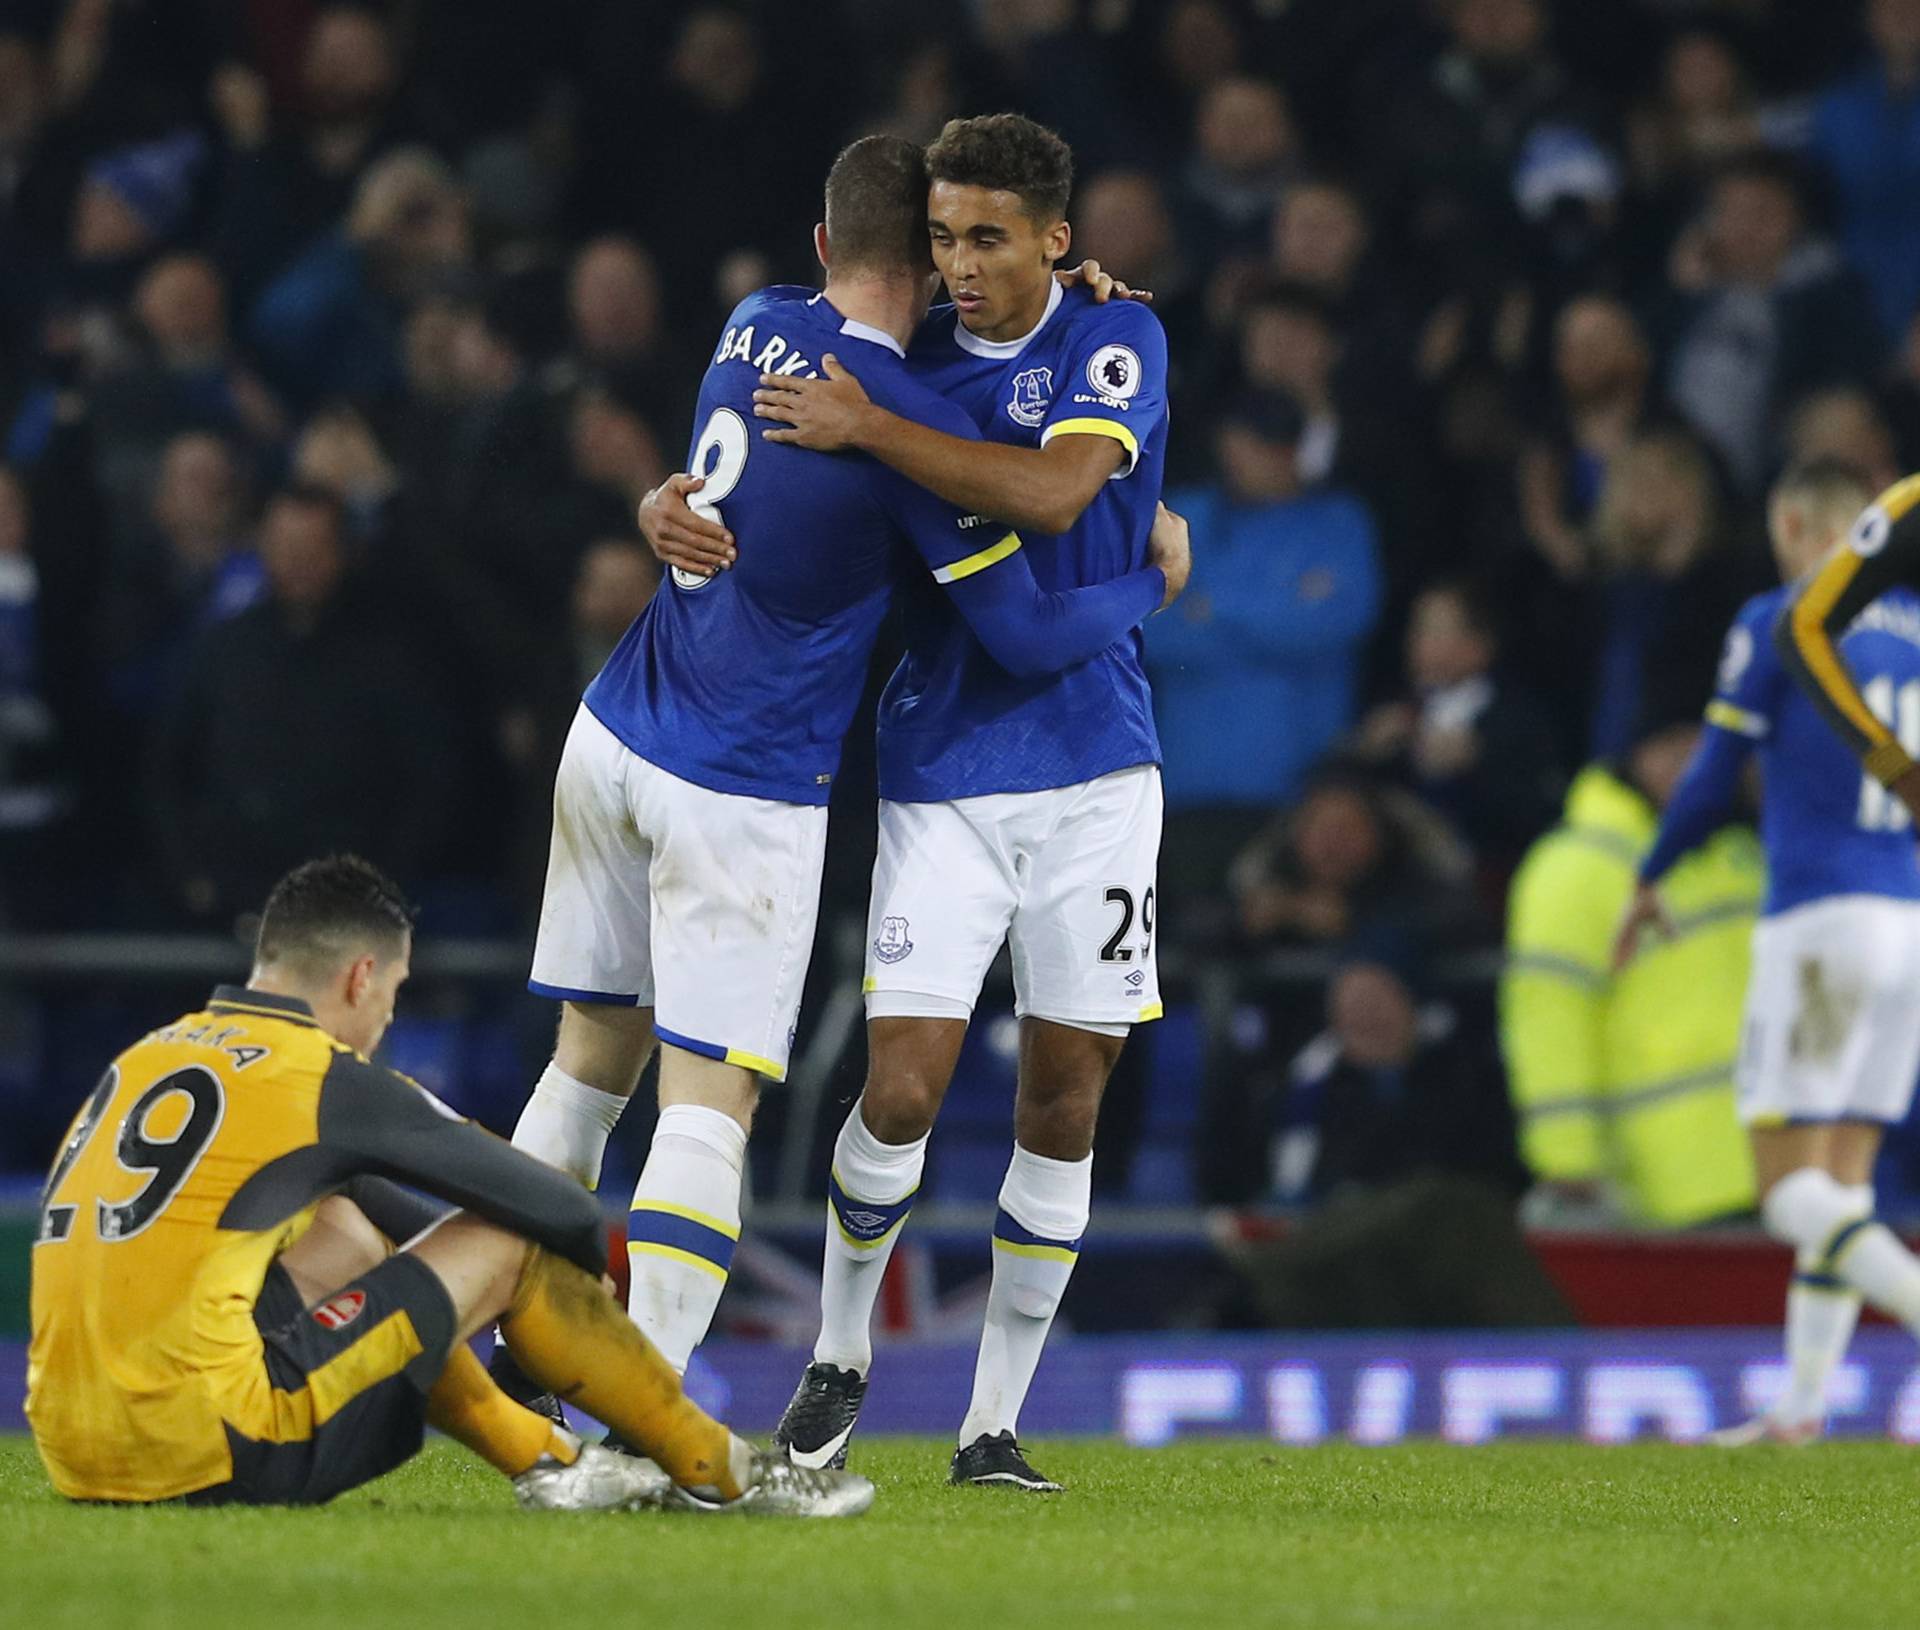 Everton's Dominic Calvert-Lewin and Ross Barkley celebrate after the game as Arsenal's Granit Xhaka looks dejected